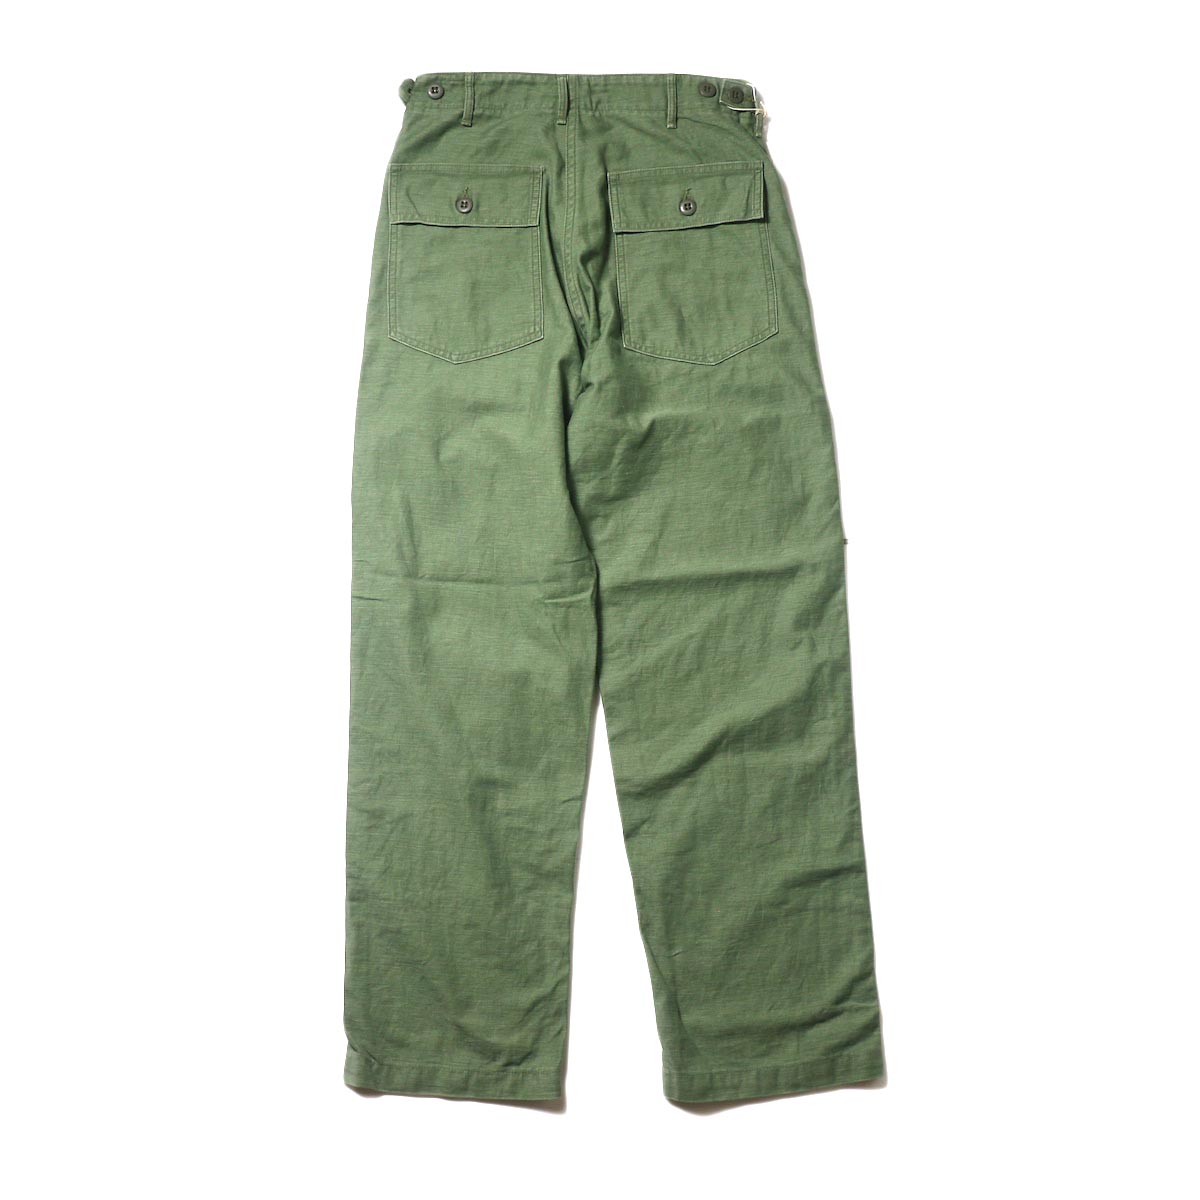 orSlow / US ARMY FATIGUE PANTS (Used Green)背面